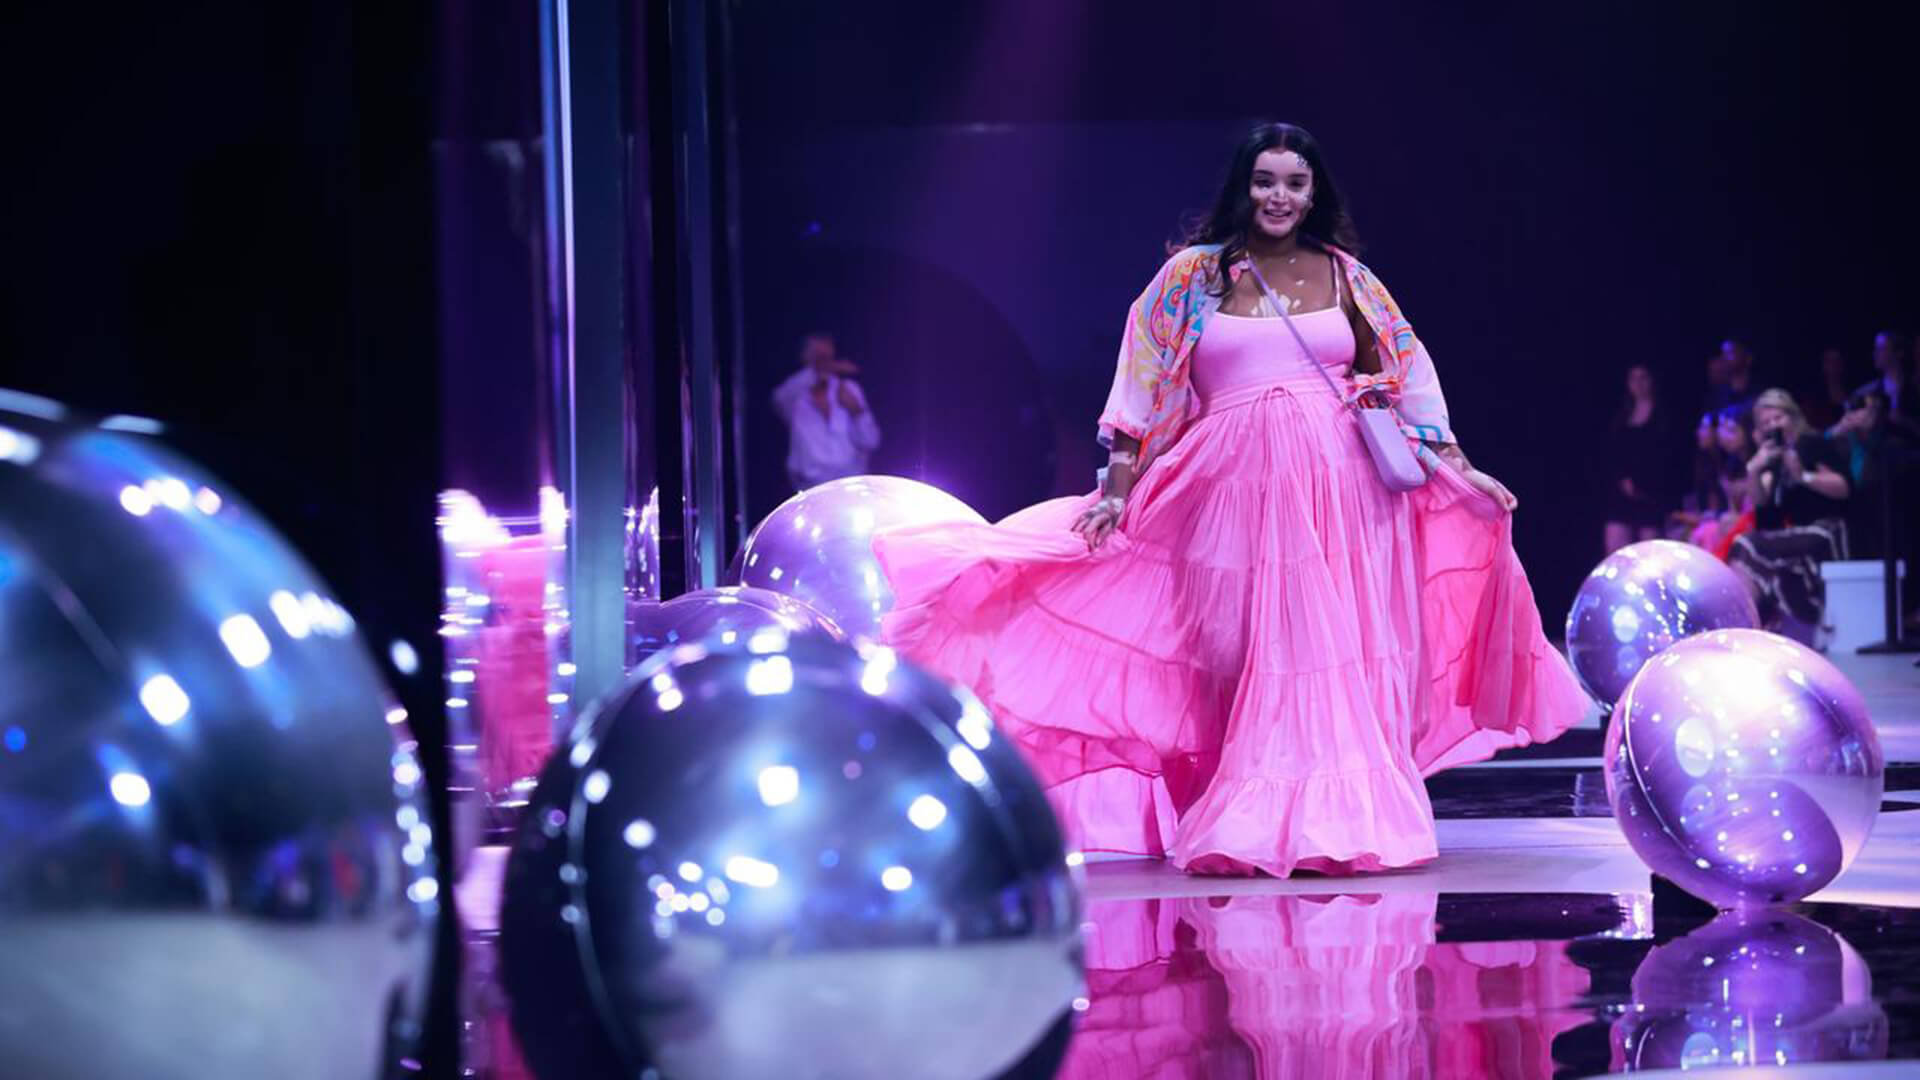 Woman in pink dress walking on fashion runway with silver reflective balls for The Iconic RUNWAY X fashion show.